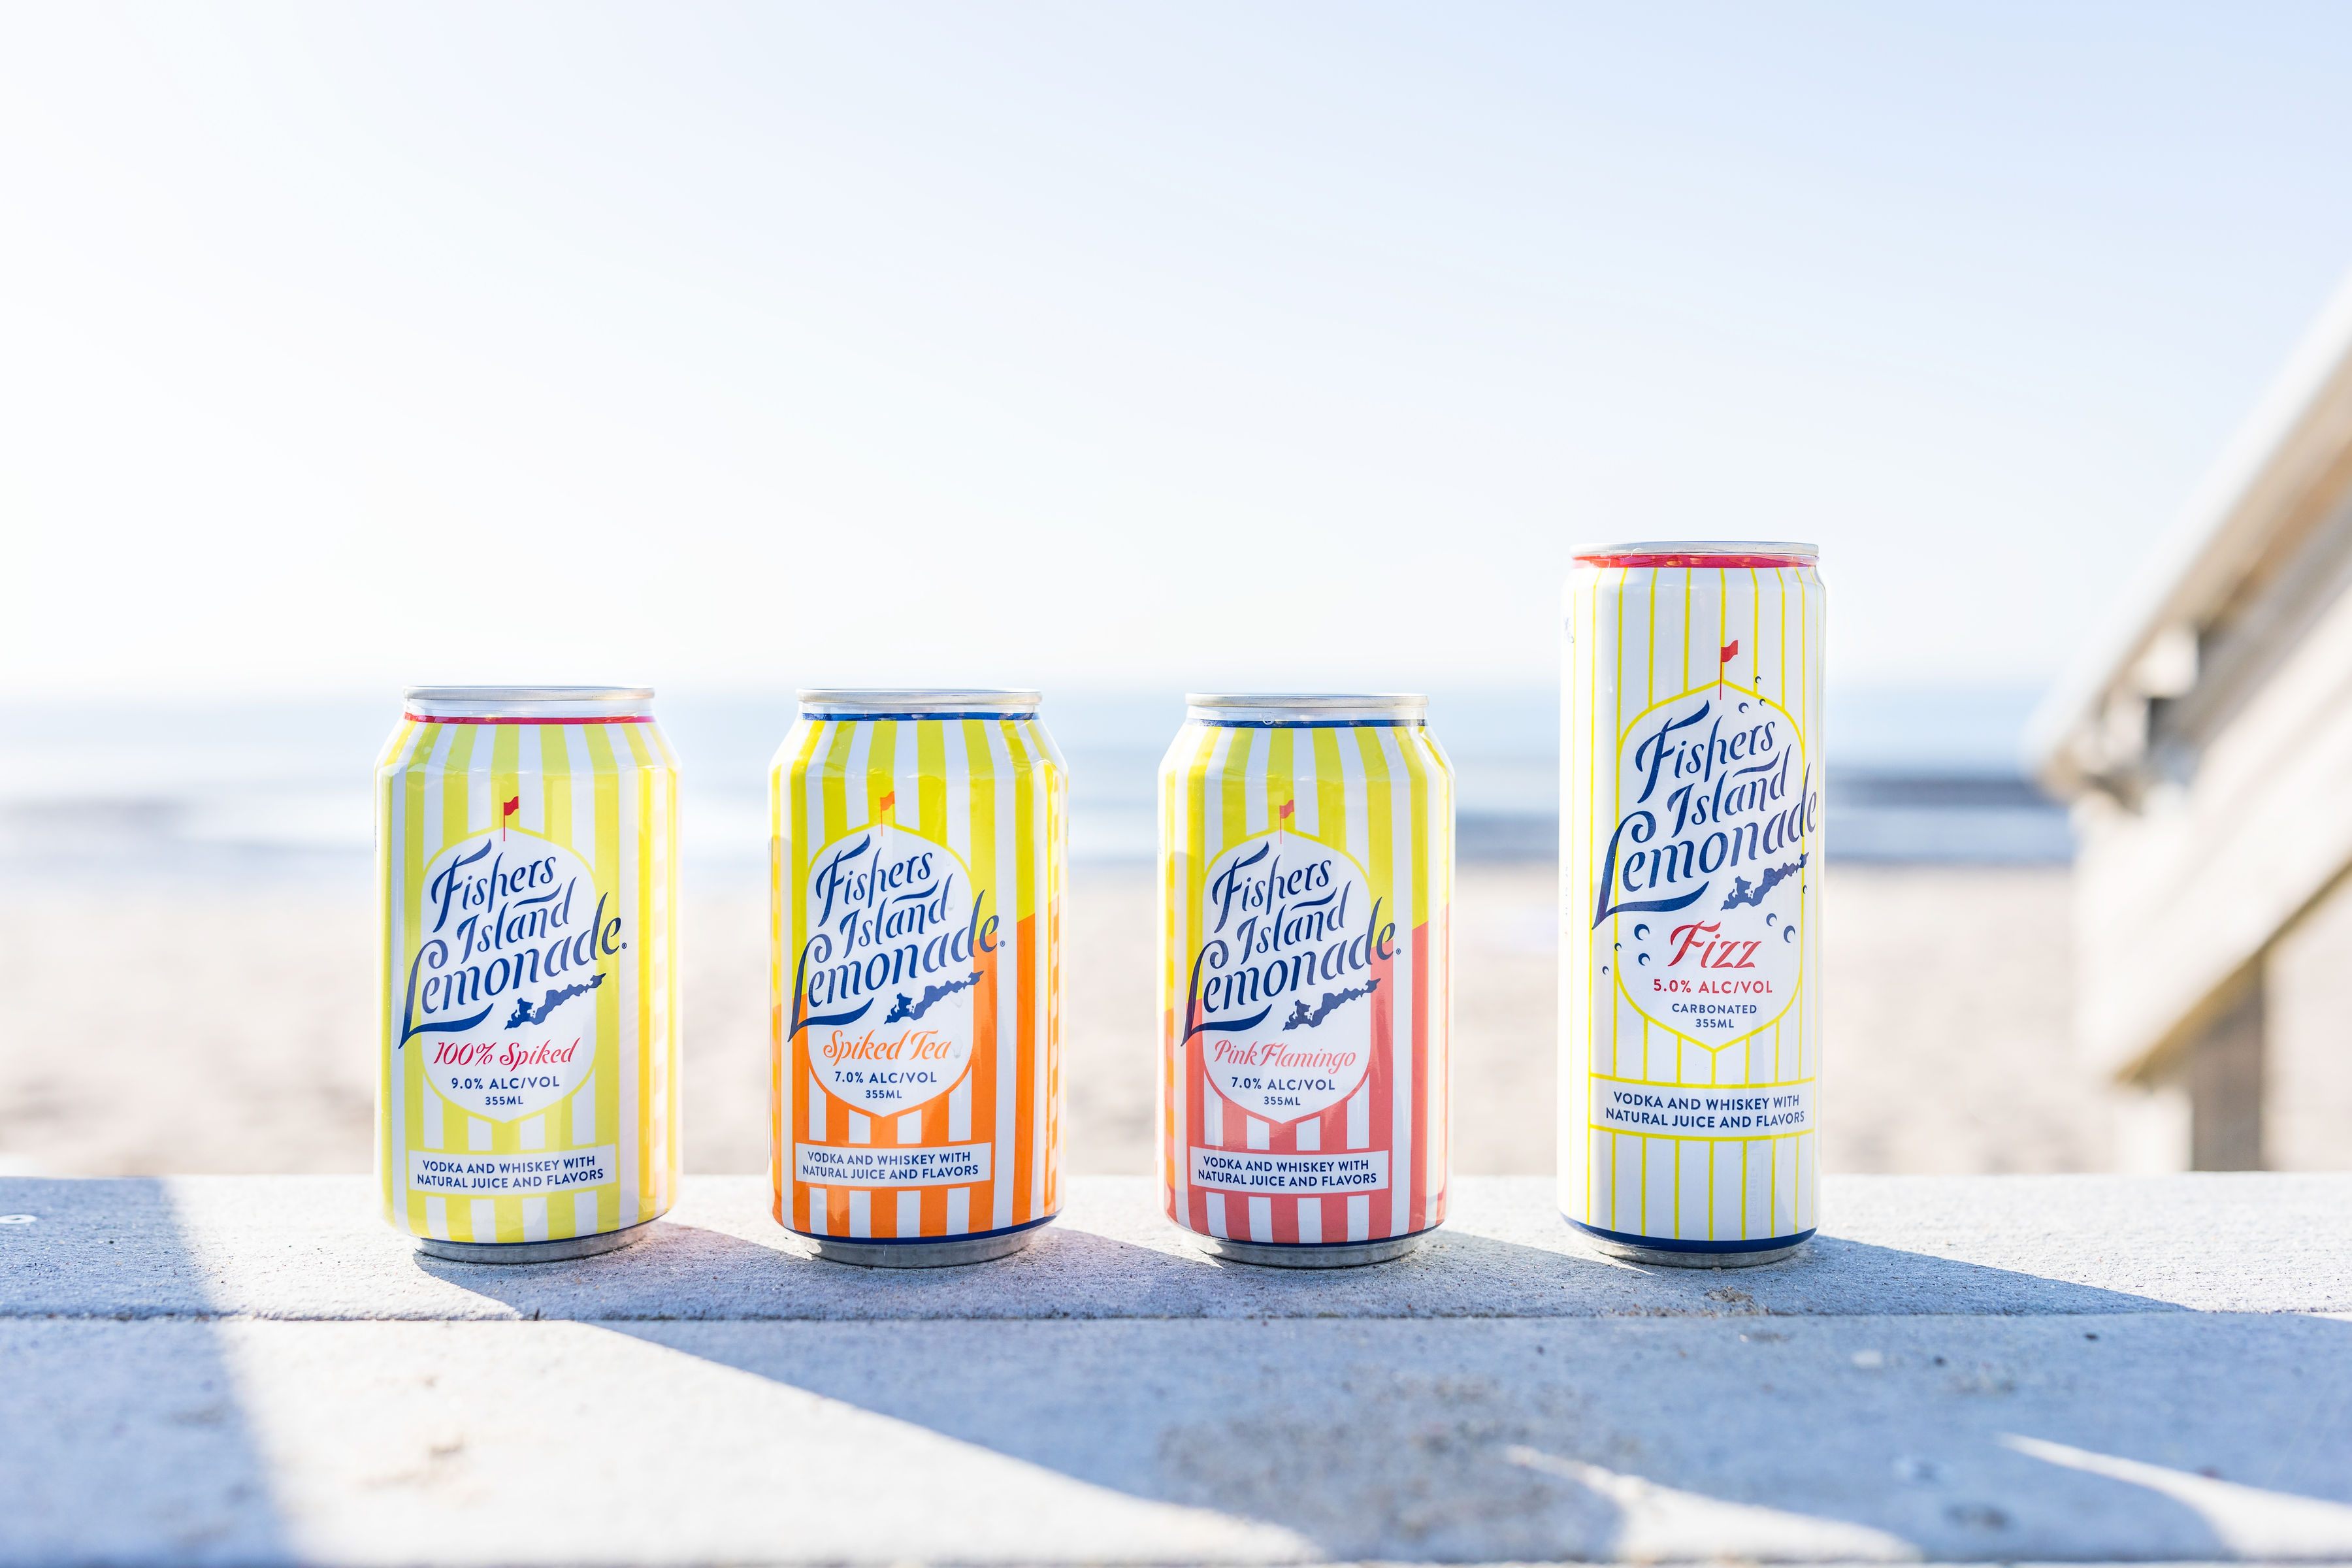 Fishers Island Lemonade product lineup at the beach